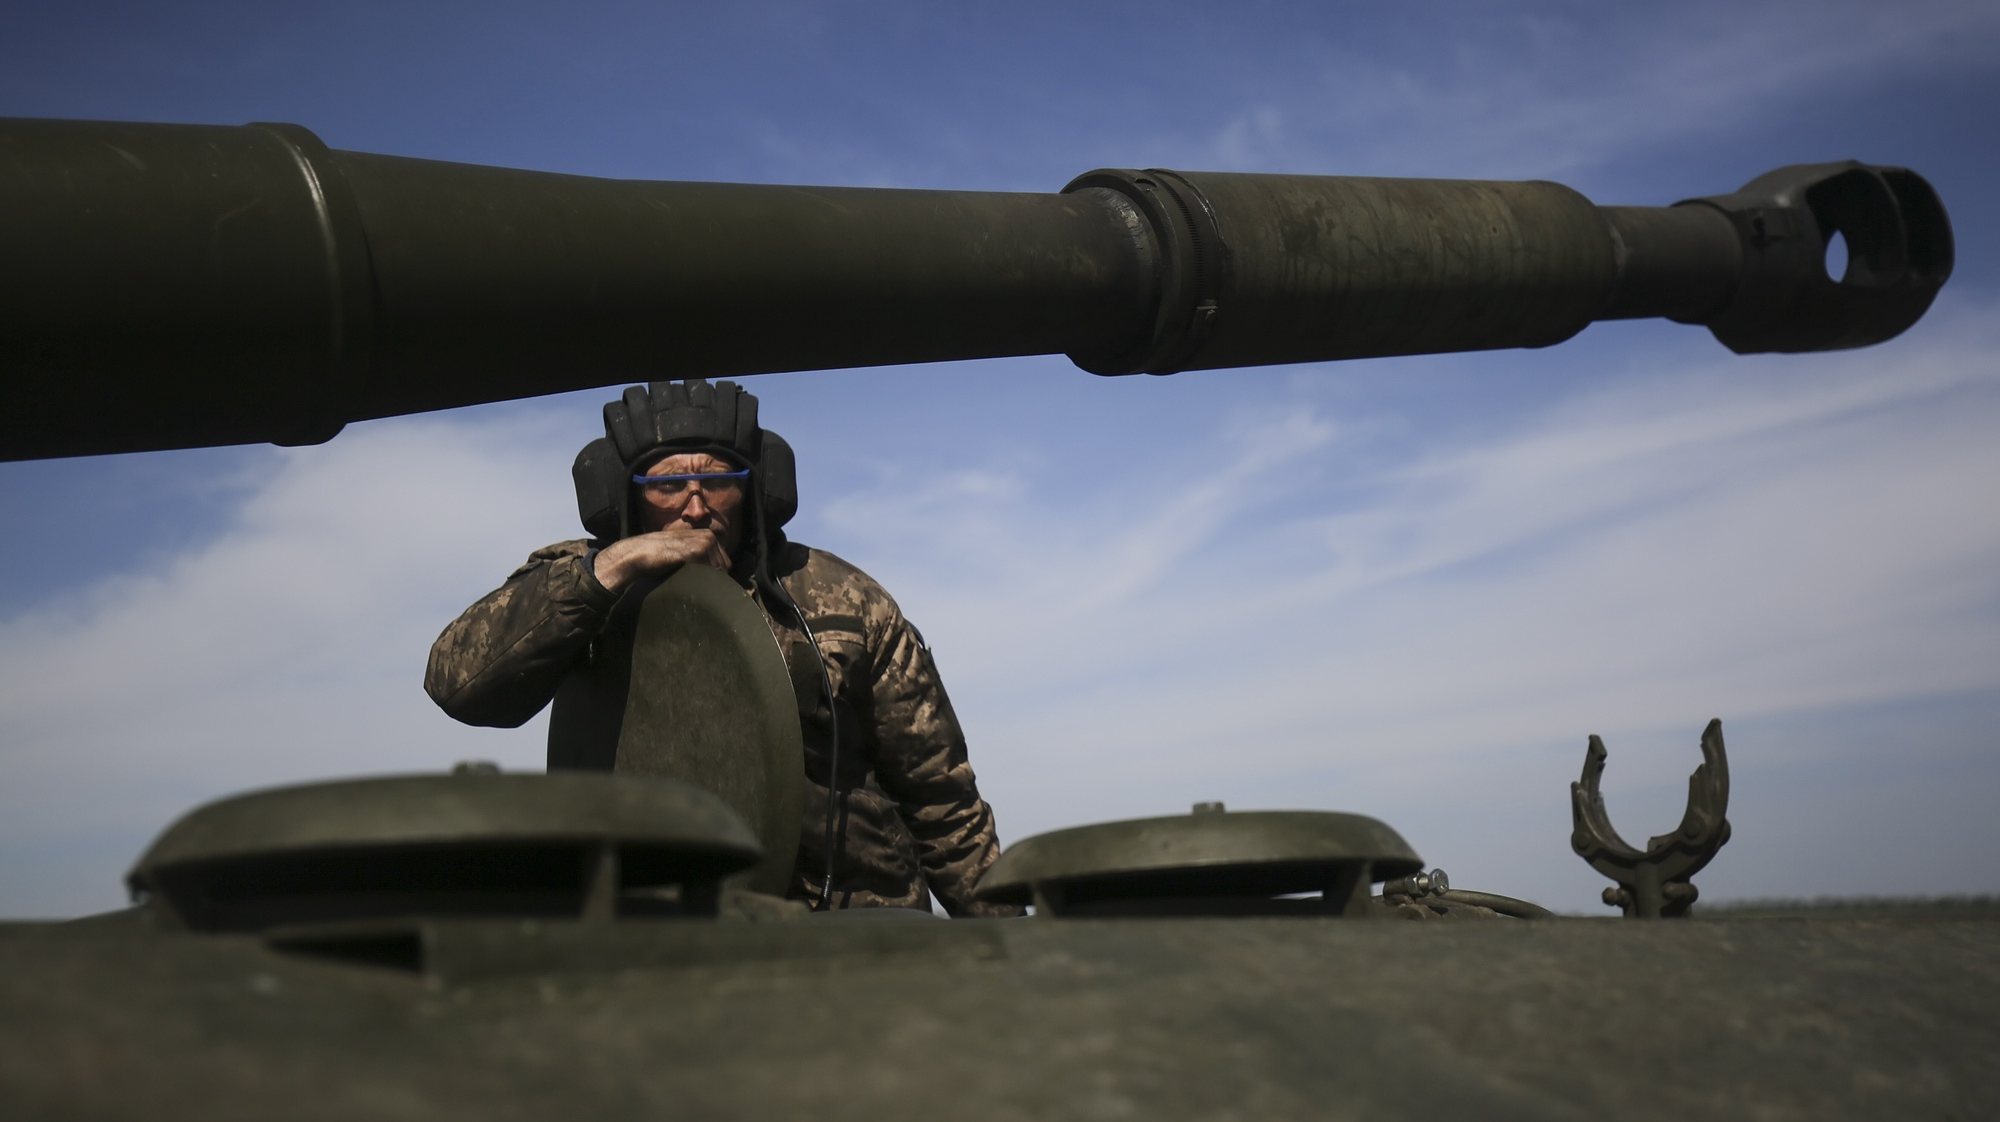 epa09931795 A Ukrainian serviceman looks on from a self-propelled howitzer, at an undisclosed area of Kharkiv, Ukraine, 07 May 2022. Russian troops entered Ukraine on 24 February, resulting in fighting and destruction in the country and fears of shortages in energy and food products globally. According to data released by the United Nations High Commission for the Refugees (UNHCR) on 06 May, over 5.8 million refugees have fled Ukraine seeking safety, protection and assistance in neighboring countries, making this the fastest growing refugee crisis since World War II. Western countries have responded with various sets of sanctions against Russian state majority owned companies and interests in a bid to bring an end to the conflict.  EPA/STRINGER